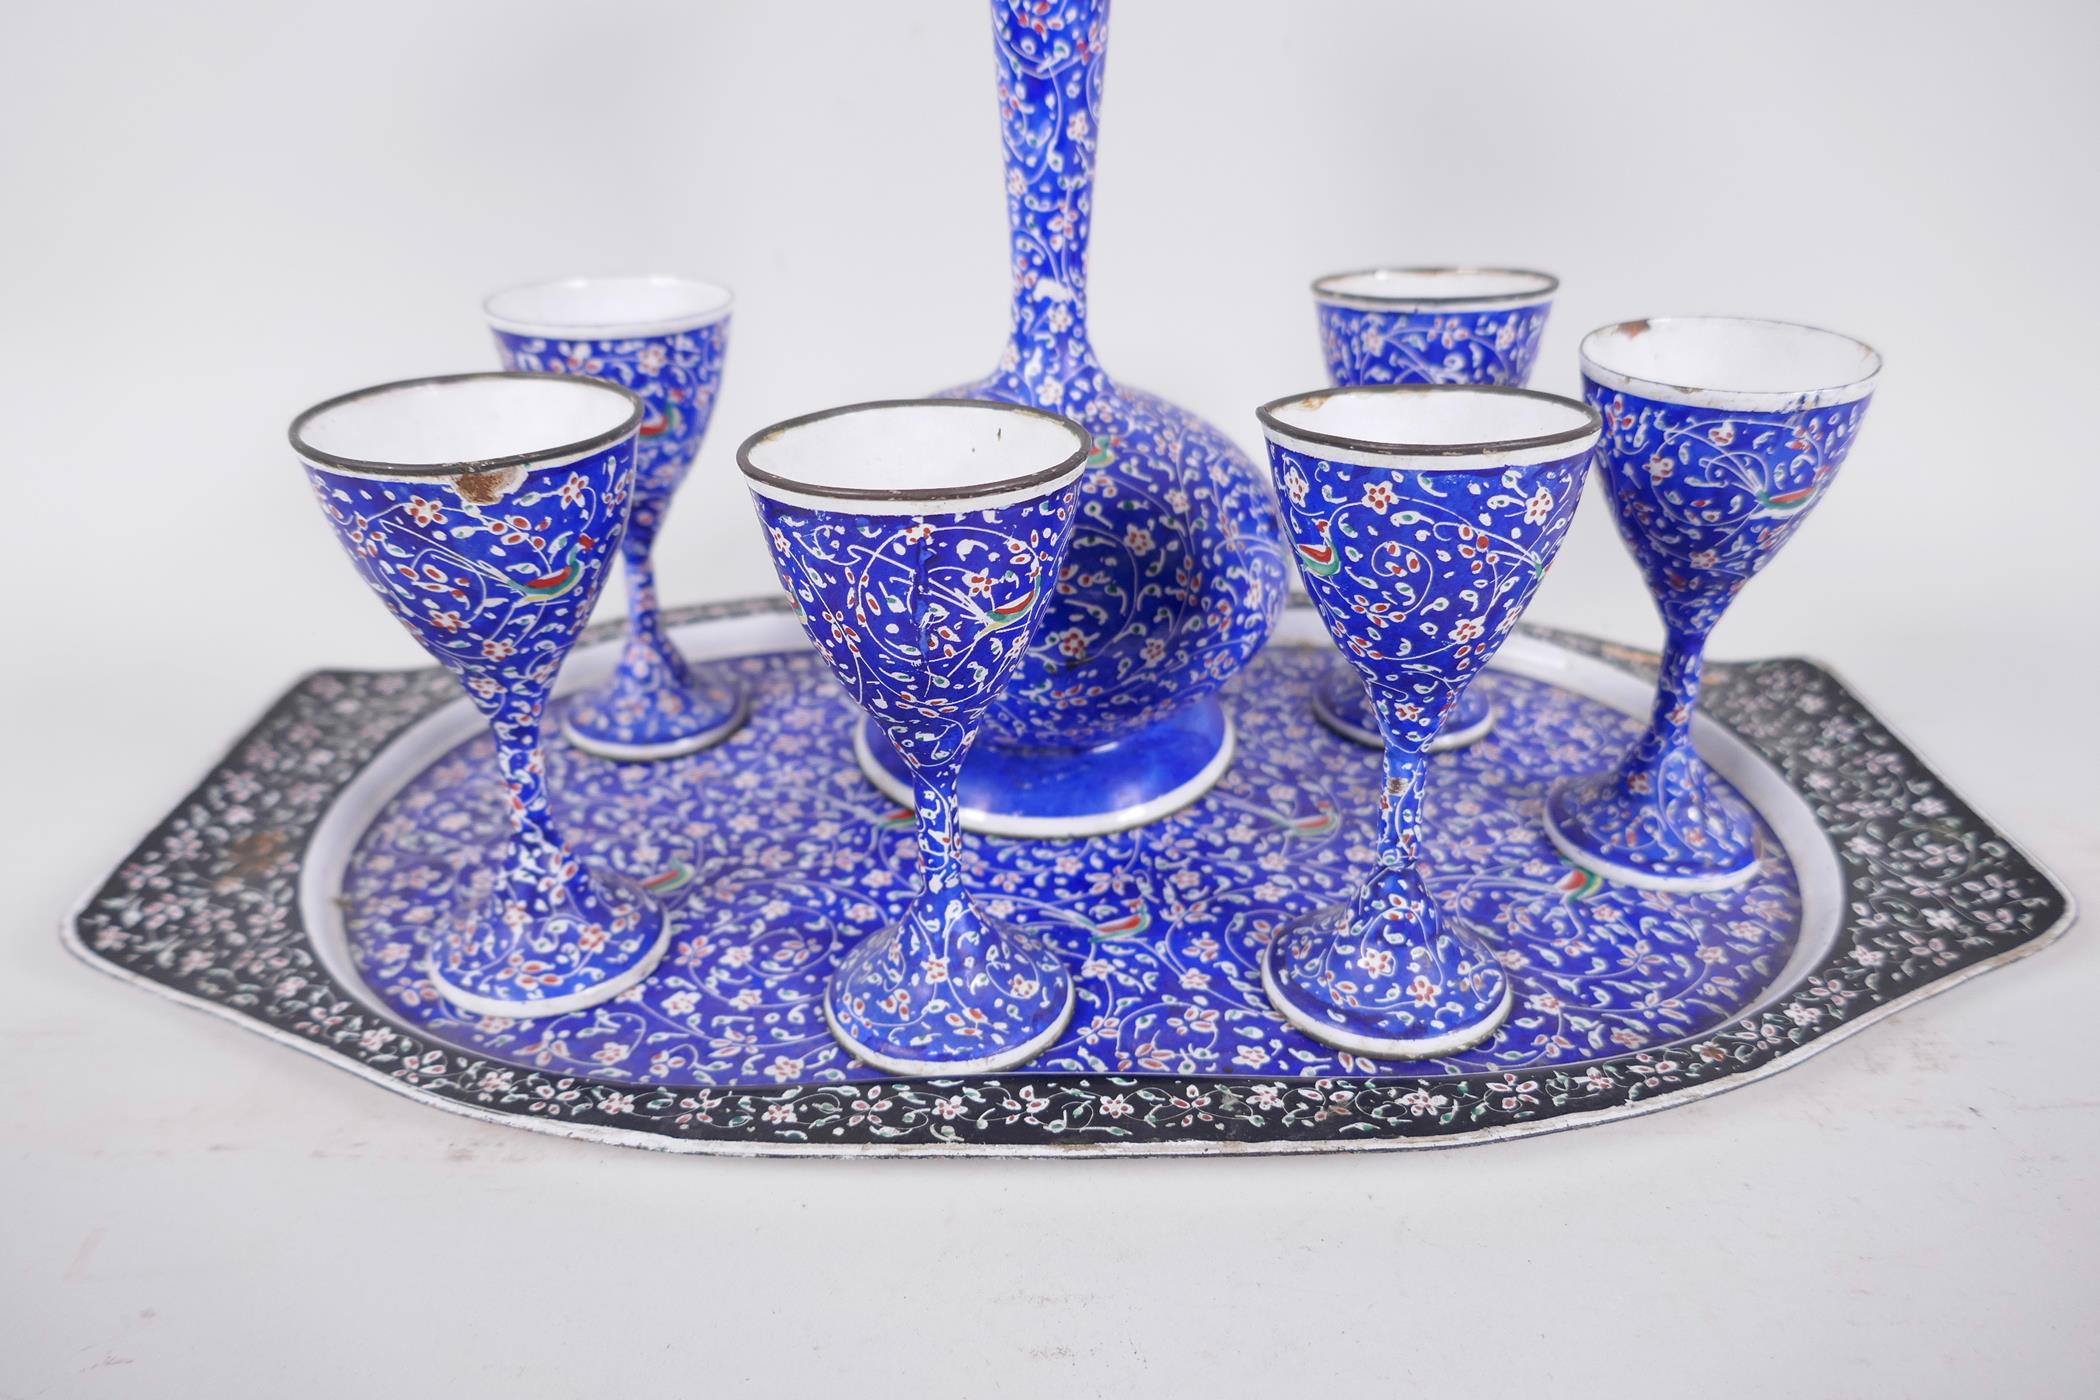 An Indian enamel wine set of carafe and six stem cups on a tray, carafe 7½" high - Image 2 of 4